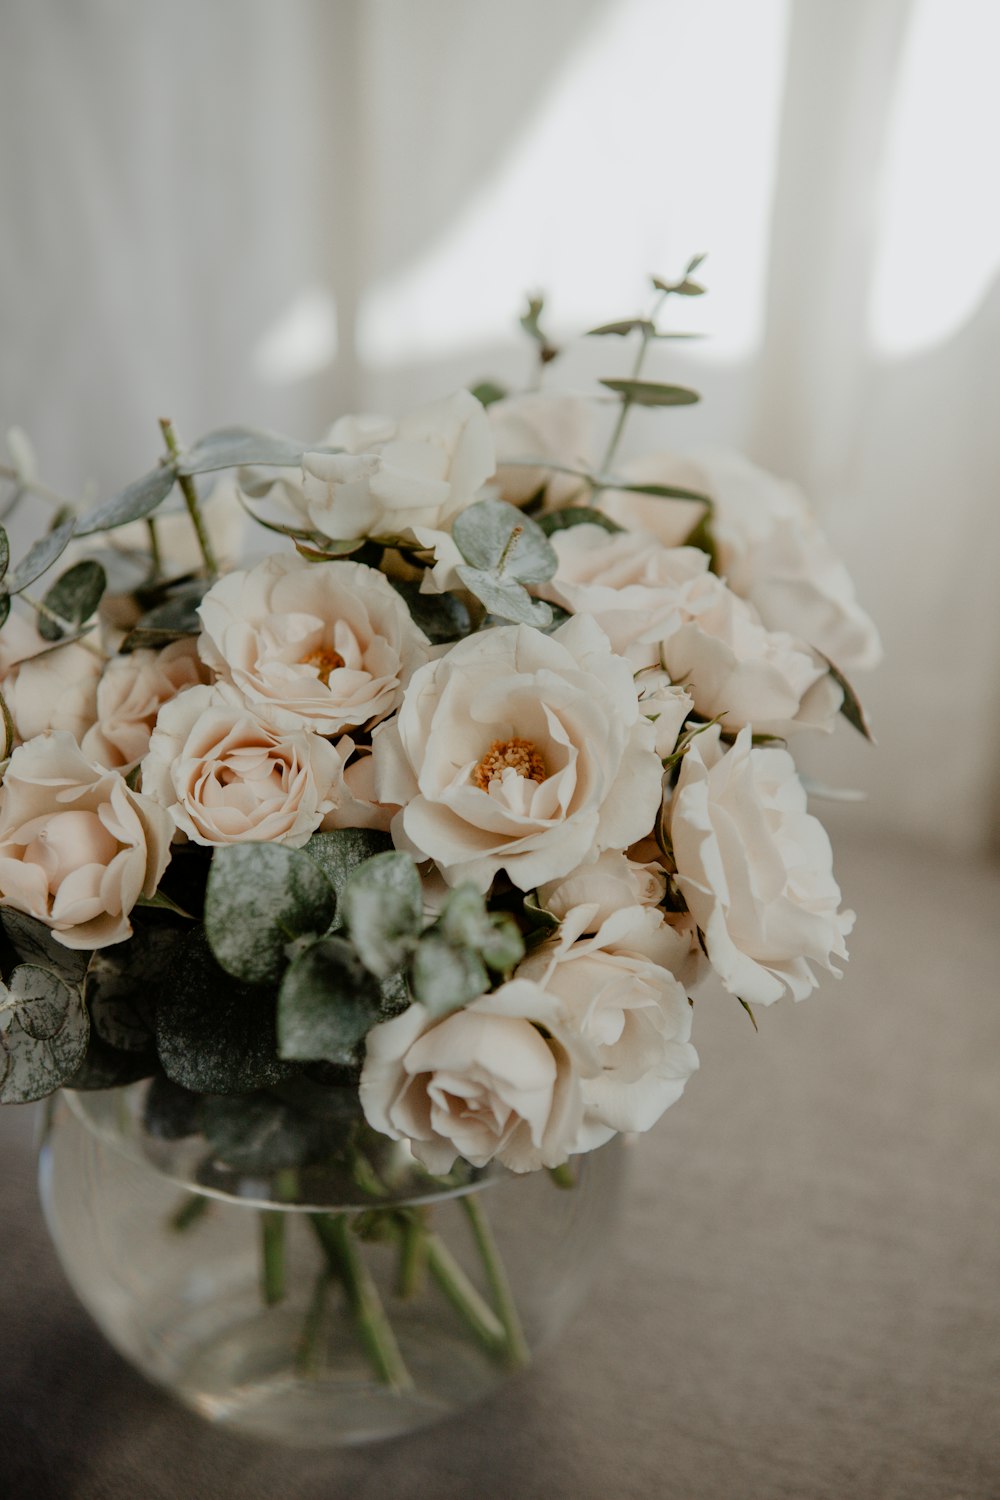 a vase filled with lots of white flowers